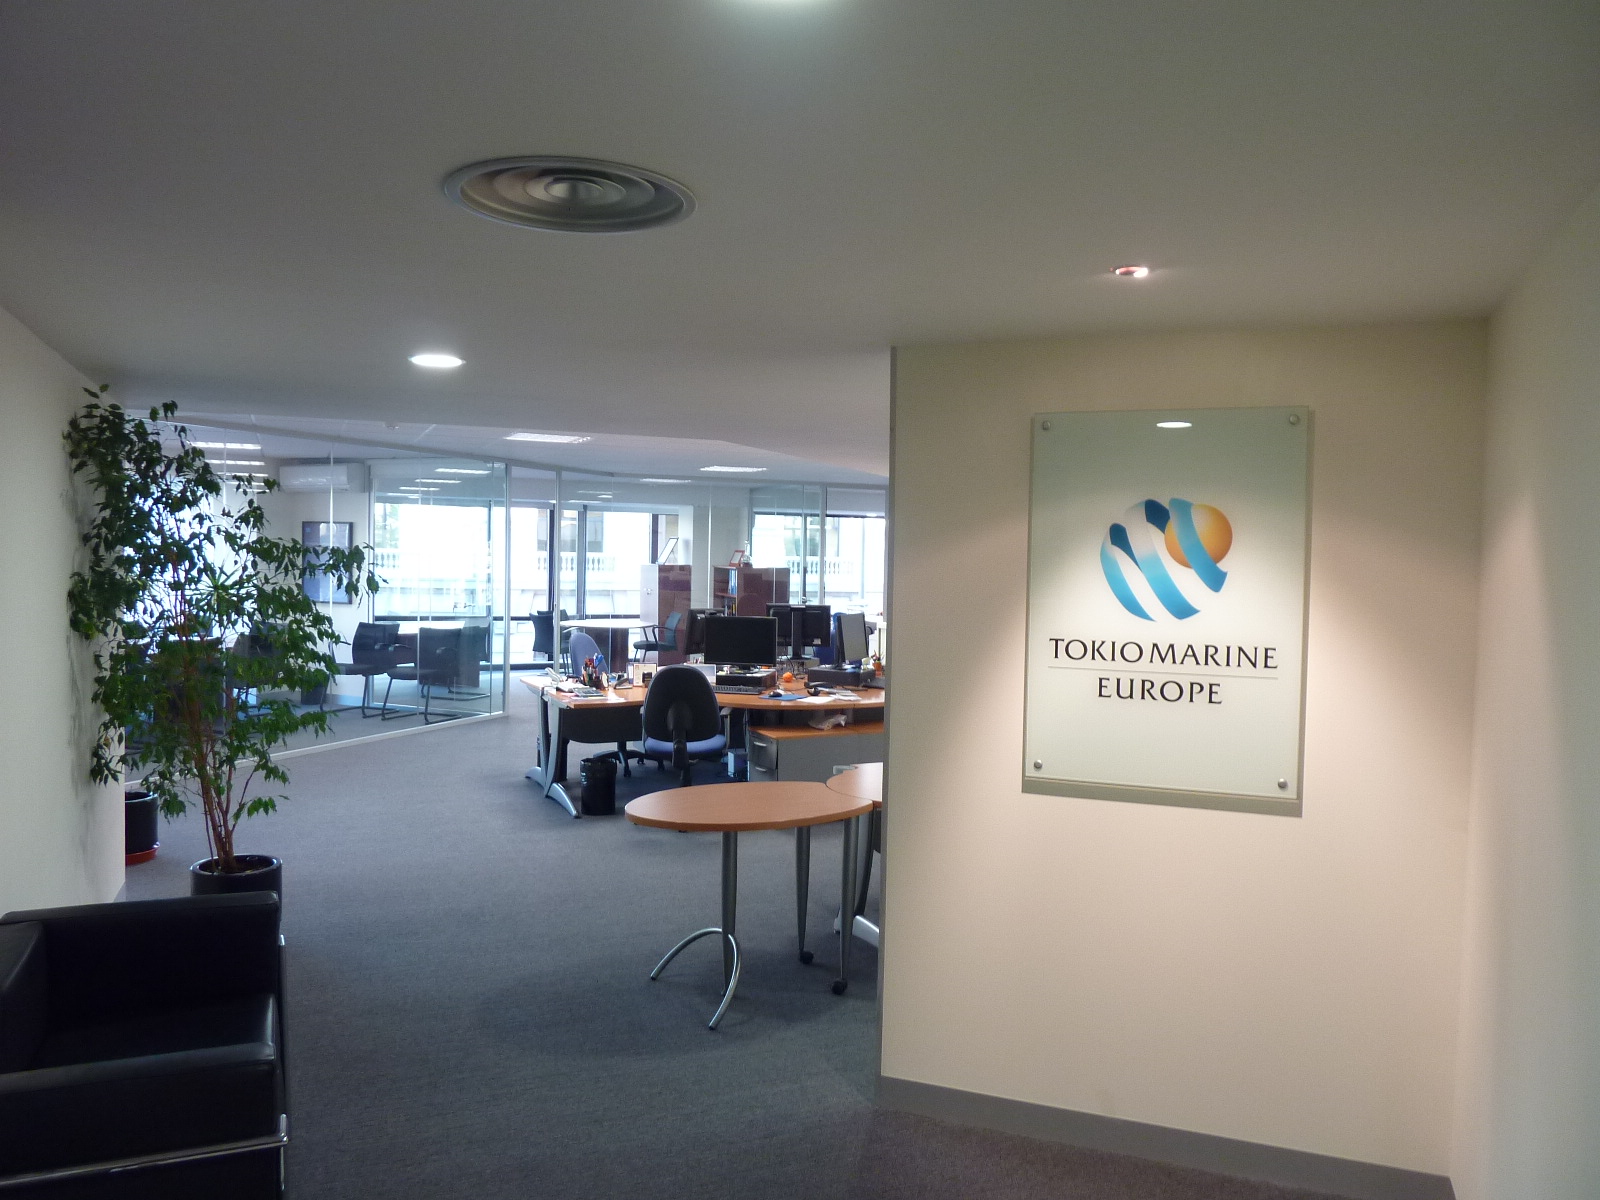 View into the renovated Office from Tokio Marine Europe, completed by Takenaka 2013